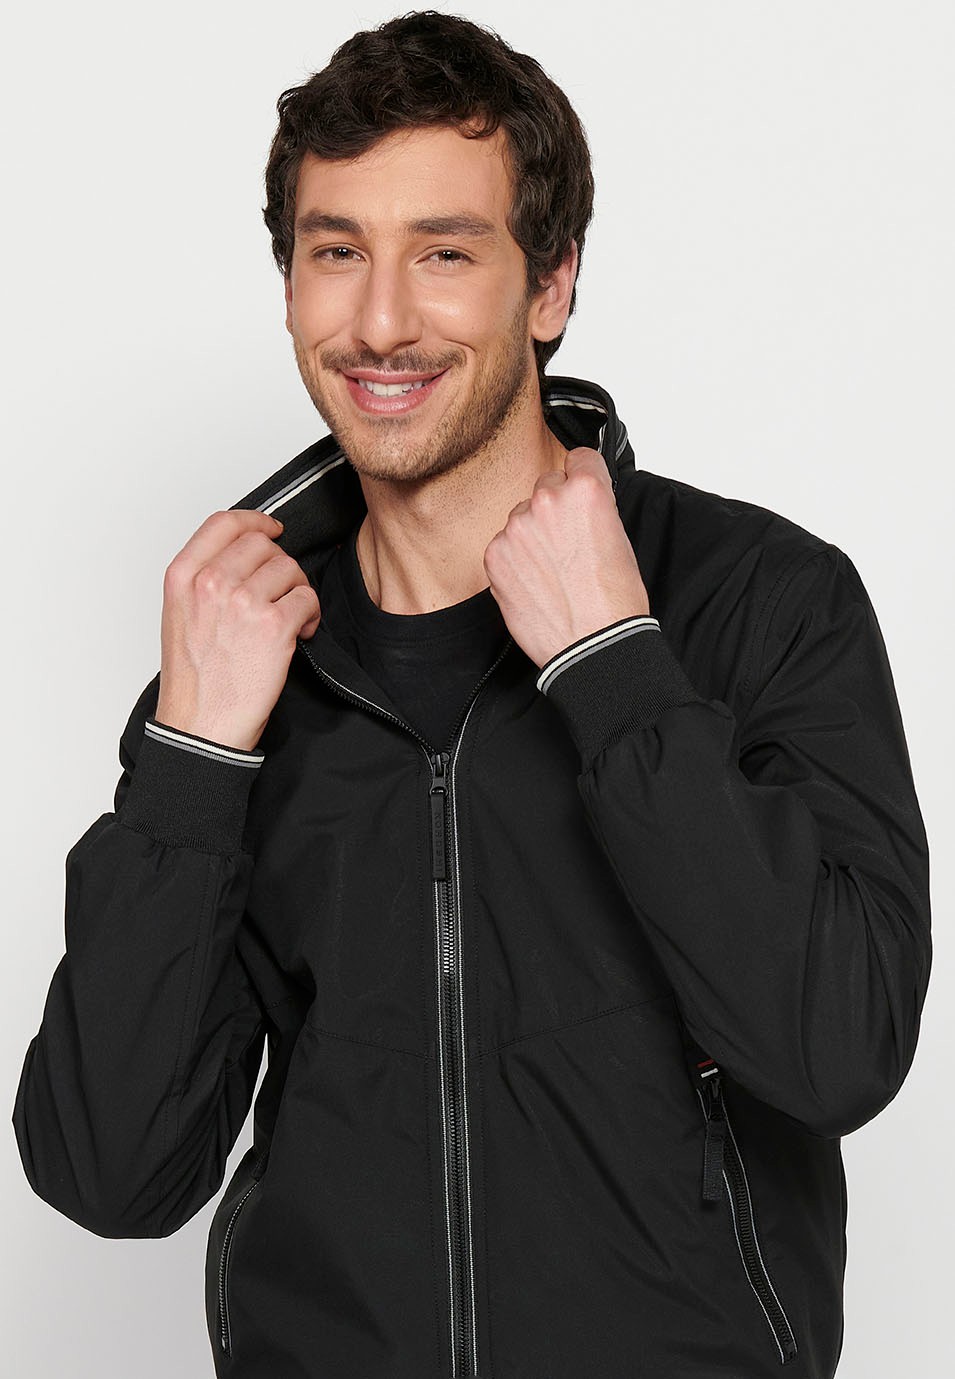 Long-sleeved high-neck windbreaker jacket with front zipper closure and ribbed finishes with pockets, one inside in Black for Men 3